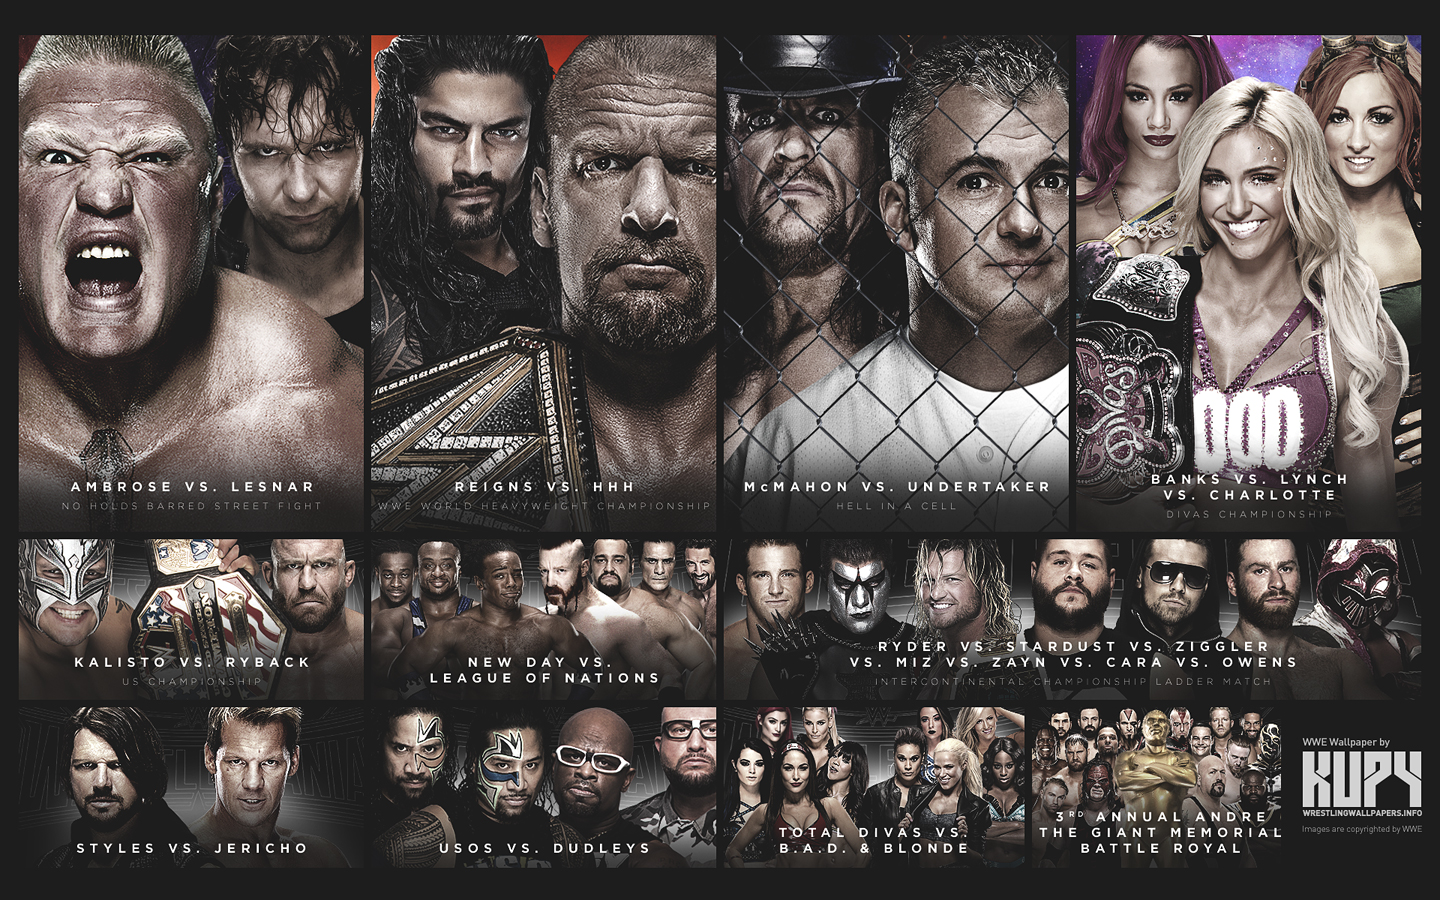 WWE image Wrestlemania 32 HD wallpaper and background photo